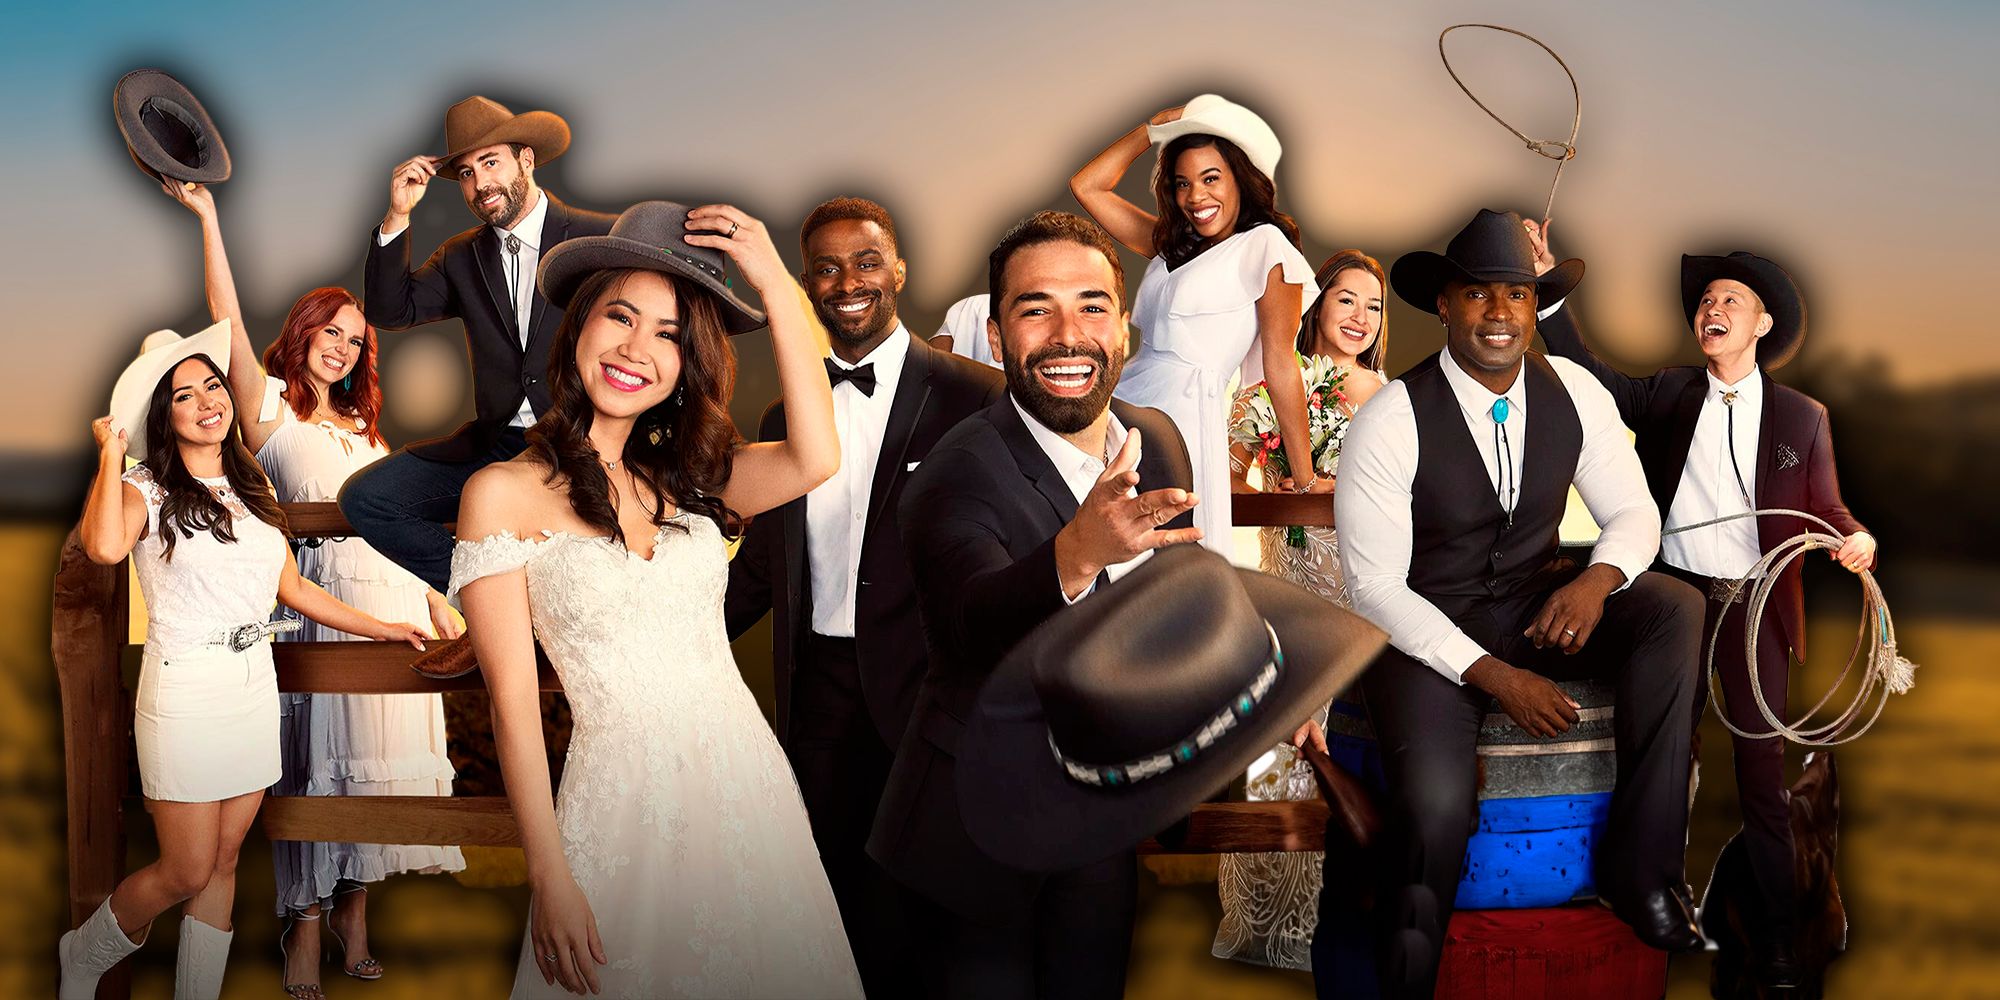 married at first sight cast image  montage